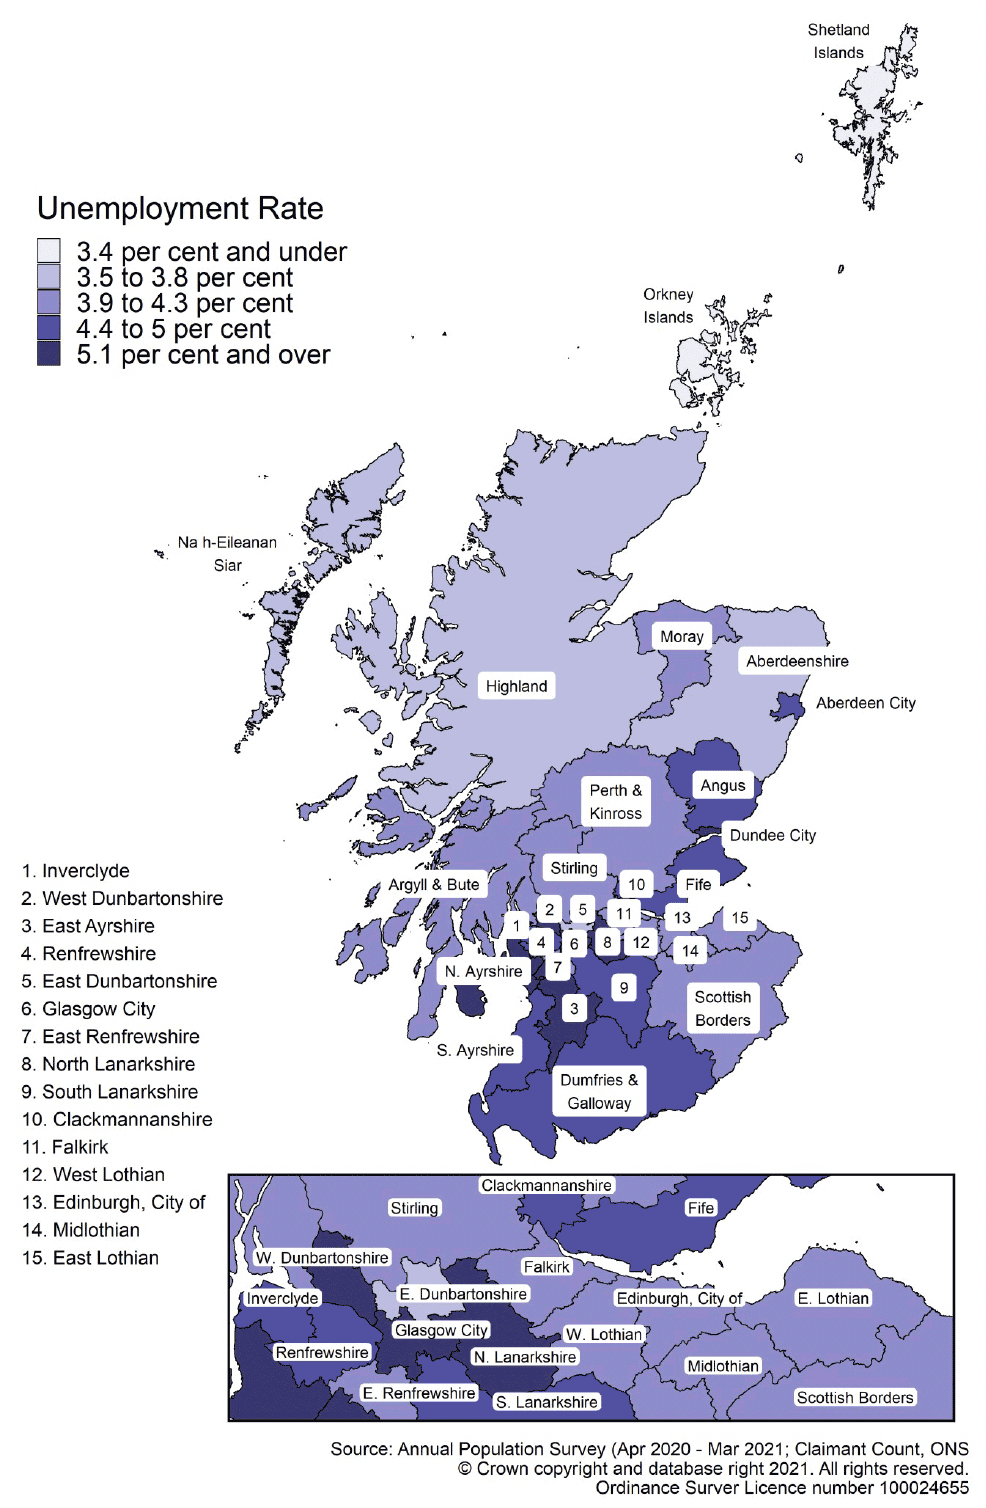 Map of Scotland showing model-based unemployment rate ranges by local authority area for ages 16 and over in April 2020 - March 2021